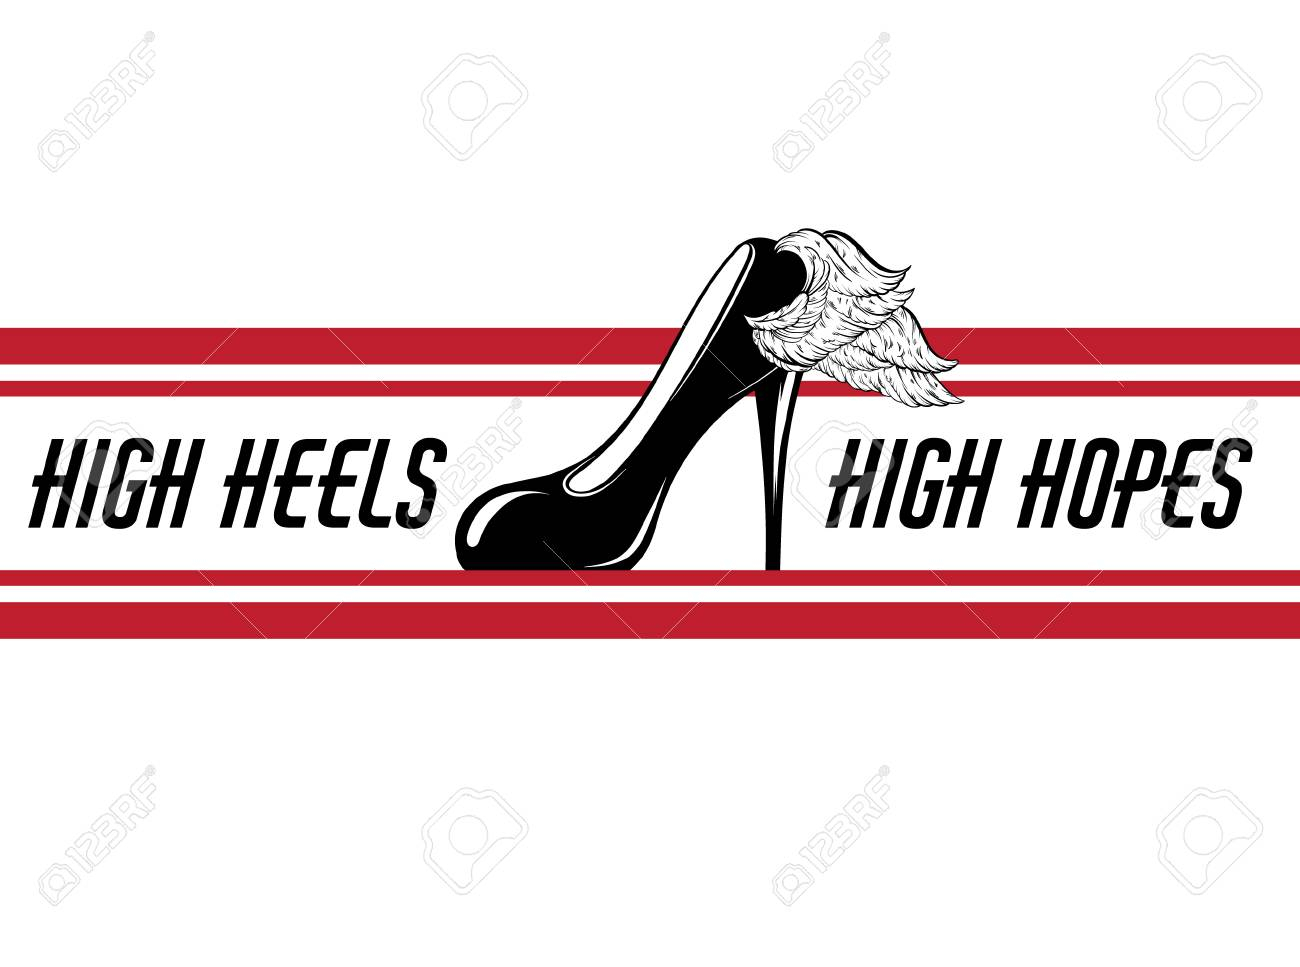 High Heels, High Hopes. Vector Hand Drawn Illustration Of Shoe.. Intended For High Heel Template For Cards